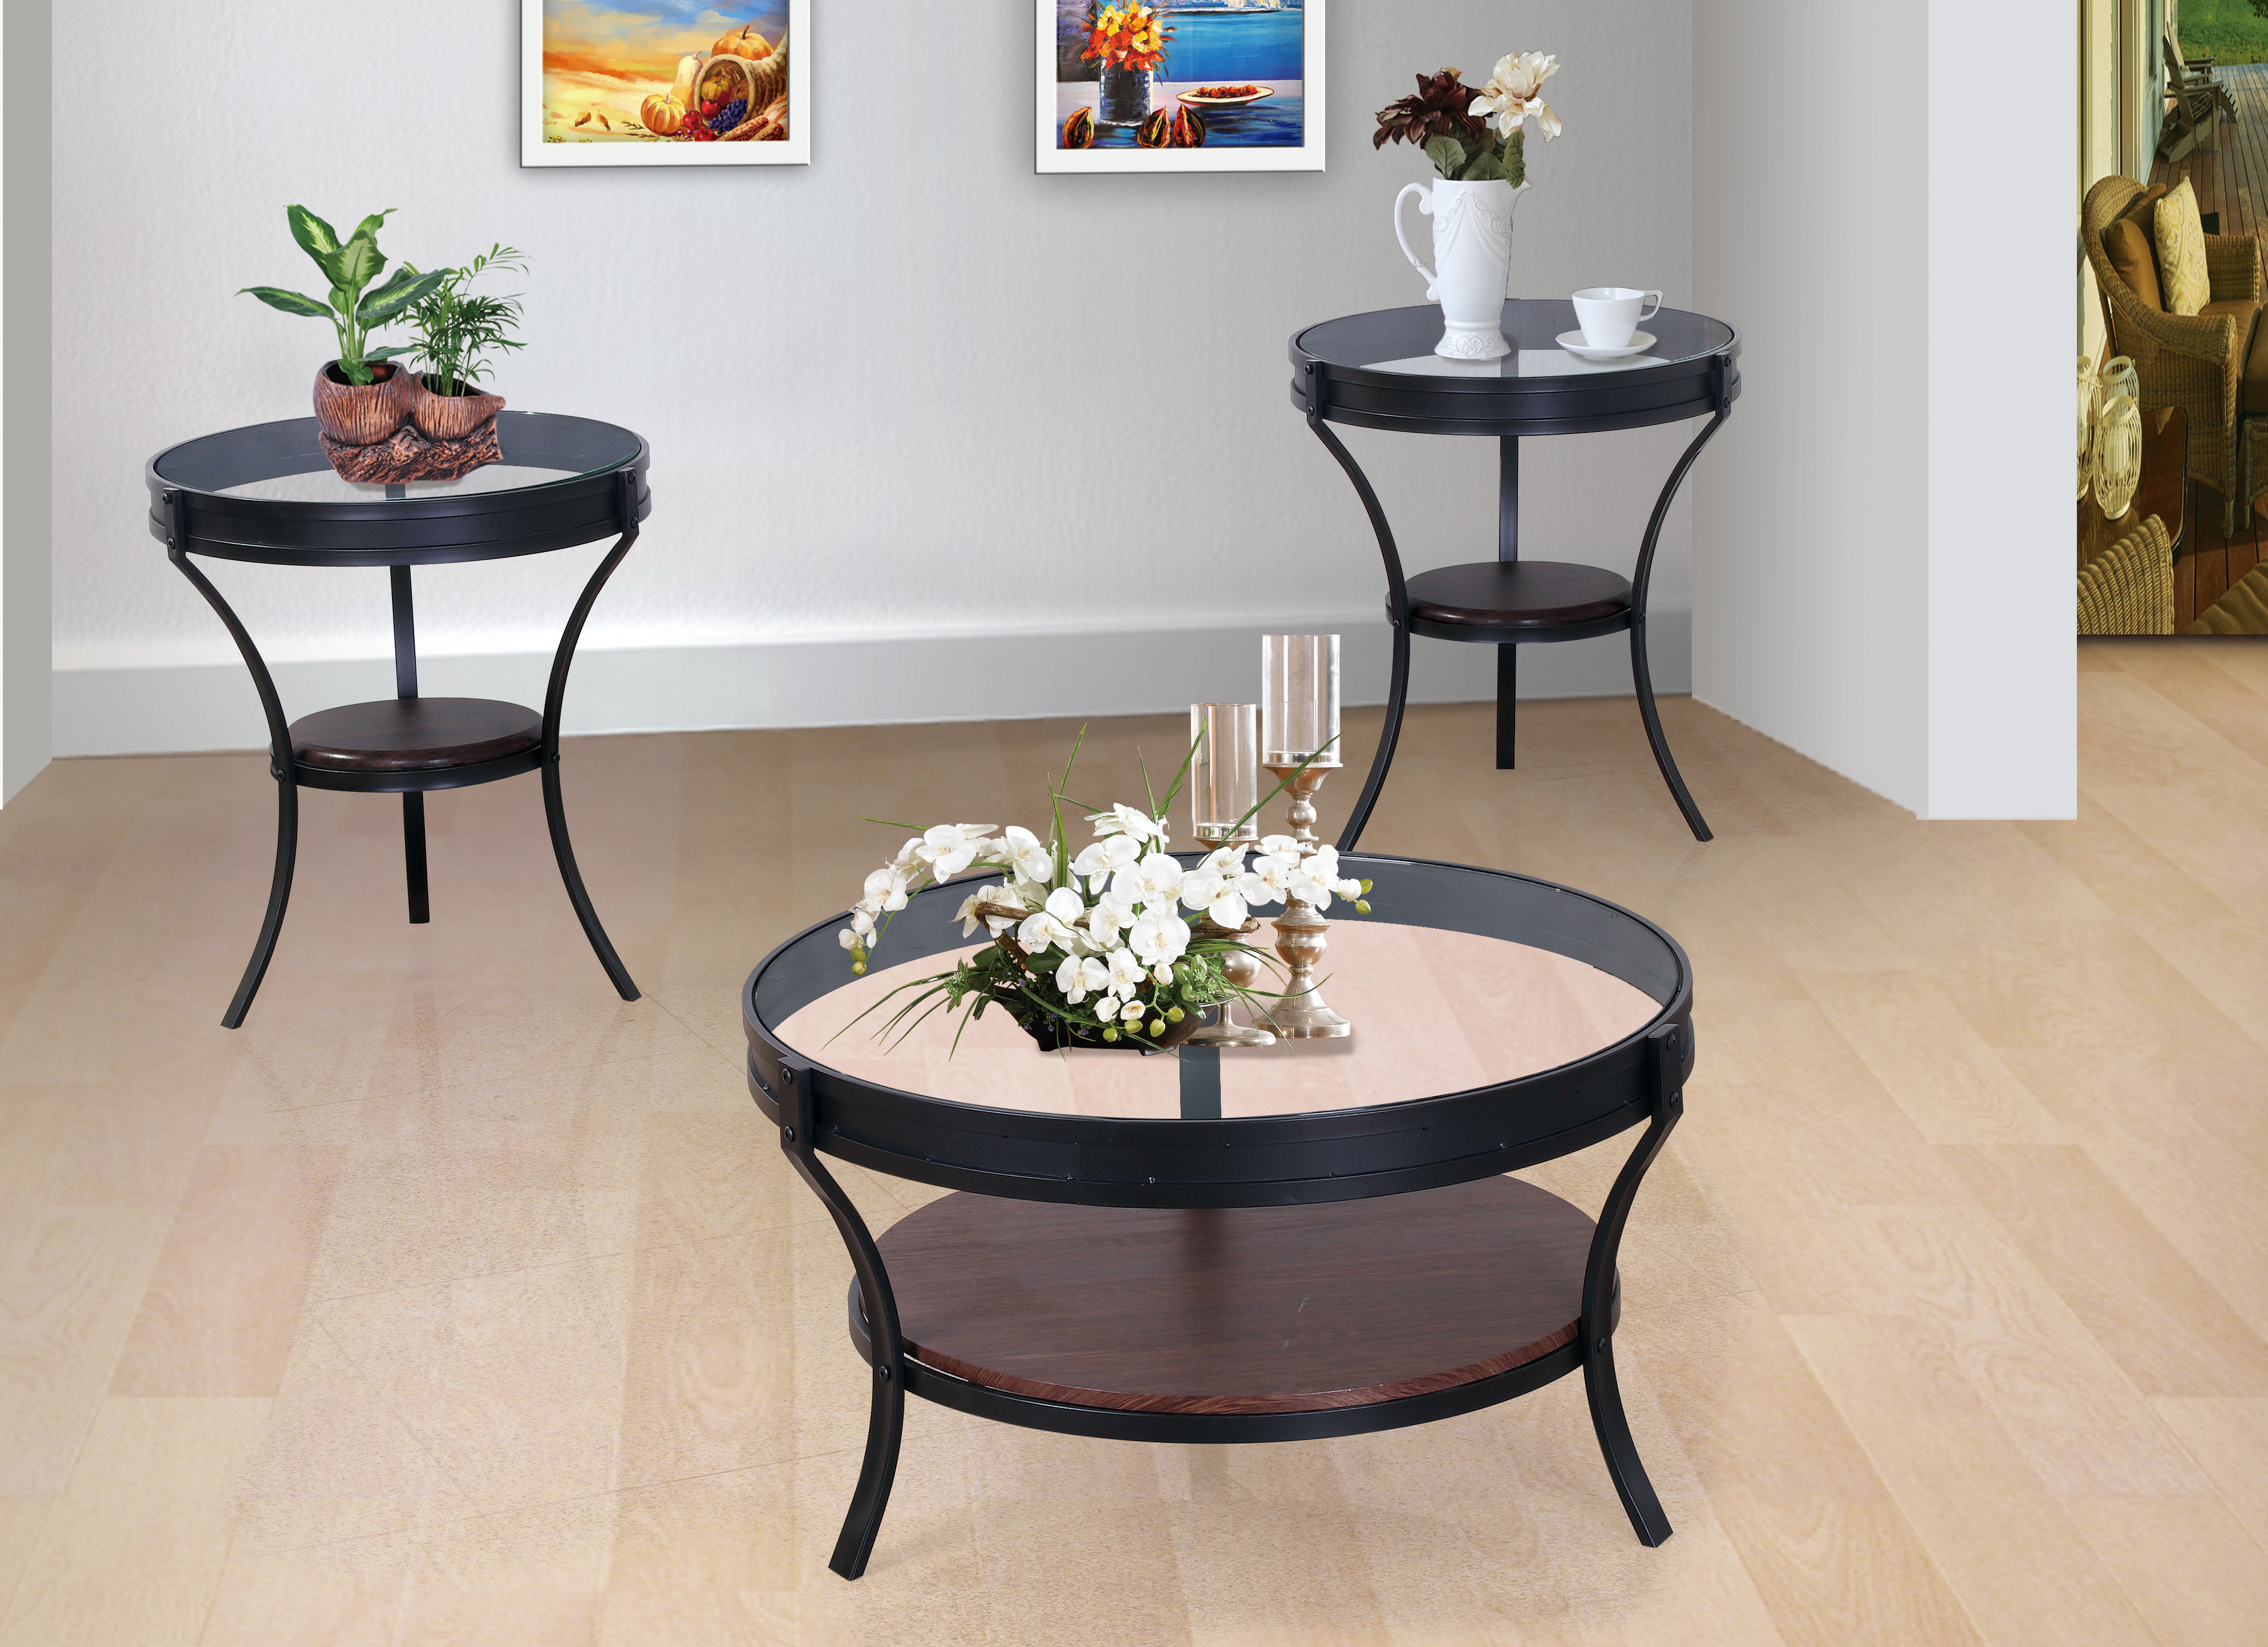 GS-CT823 3PC OCCASIONAL TABLE SET Featured Image